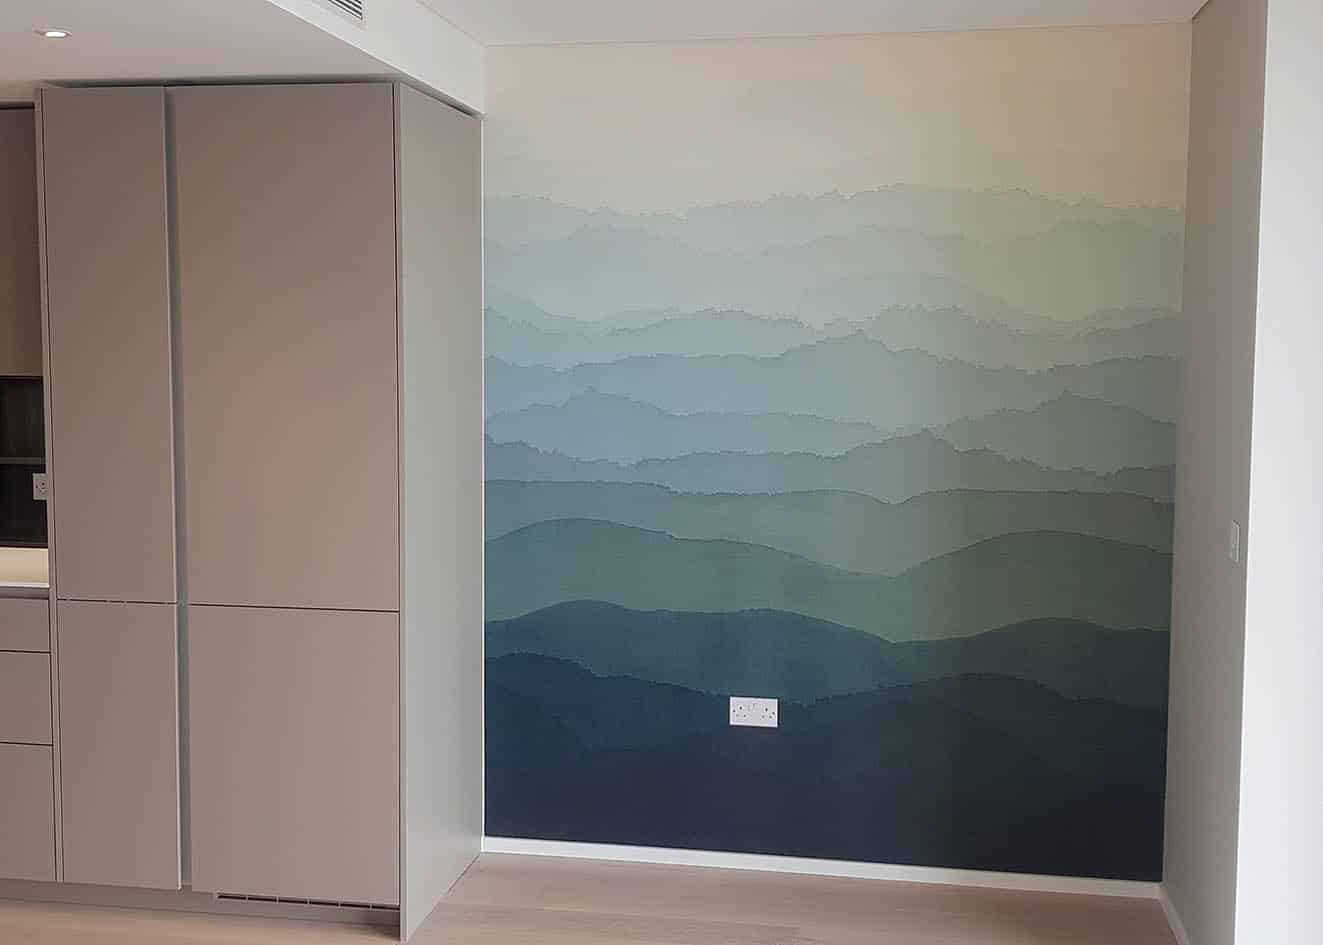 Wrey by Zoffany wall panel installed by our wallpaper hangers in a open plan living room. The wall panel is has overlayed layers in shades of blue with ombre effect. There is a kitchen unit on left.